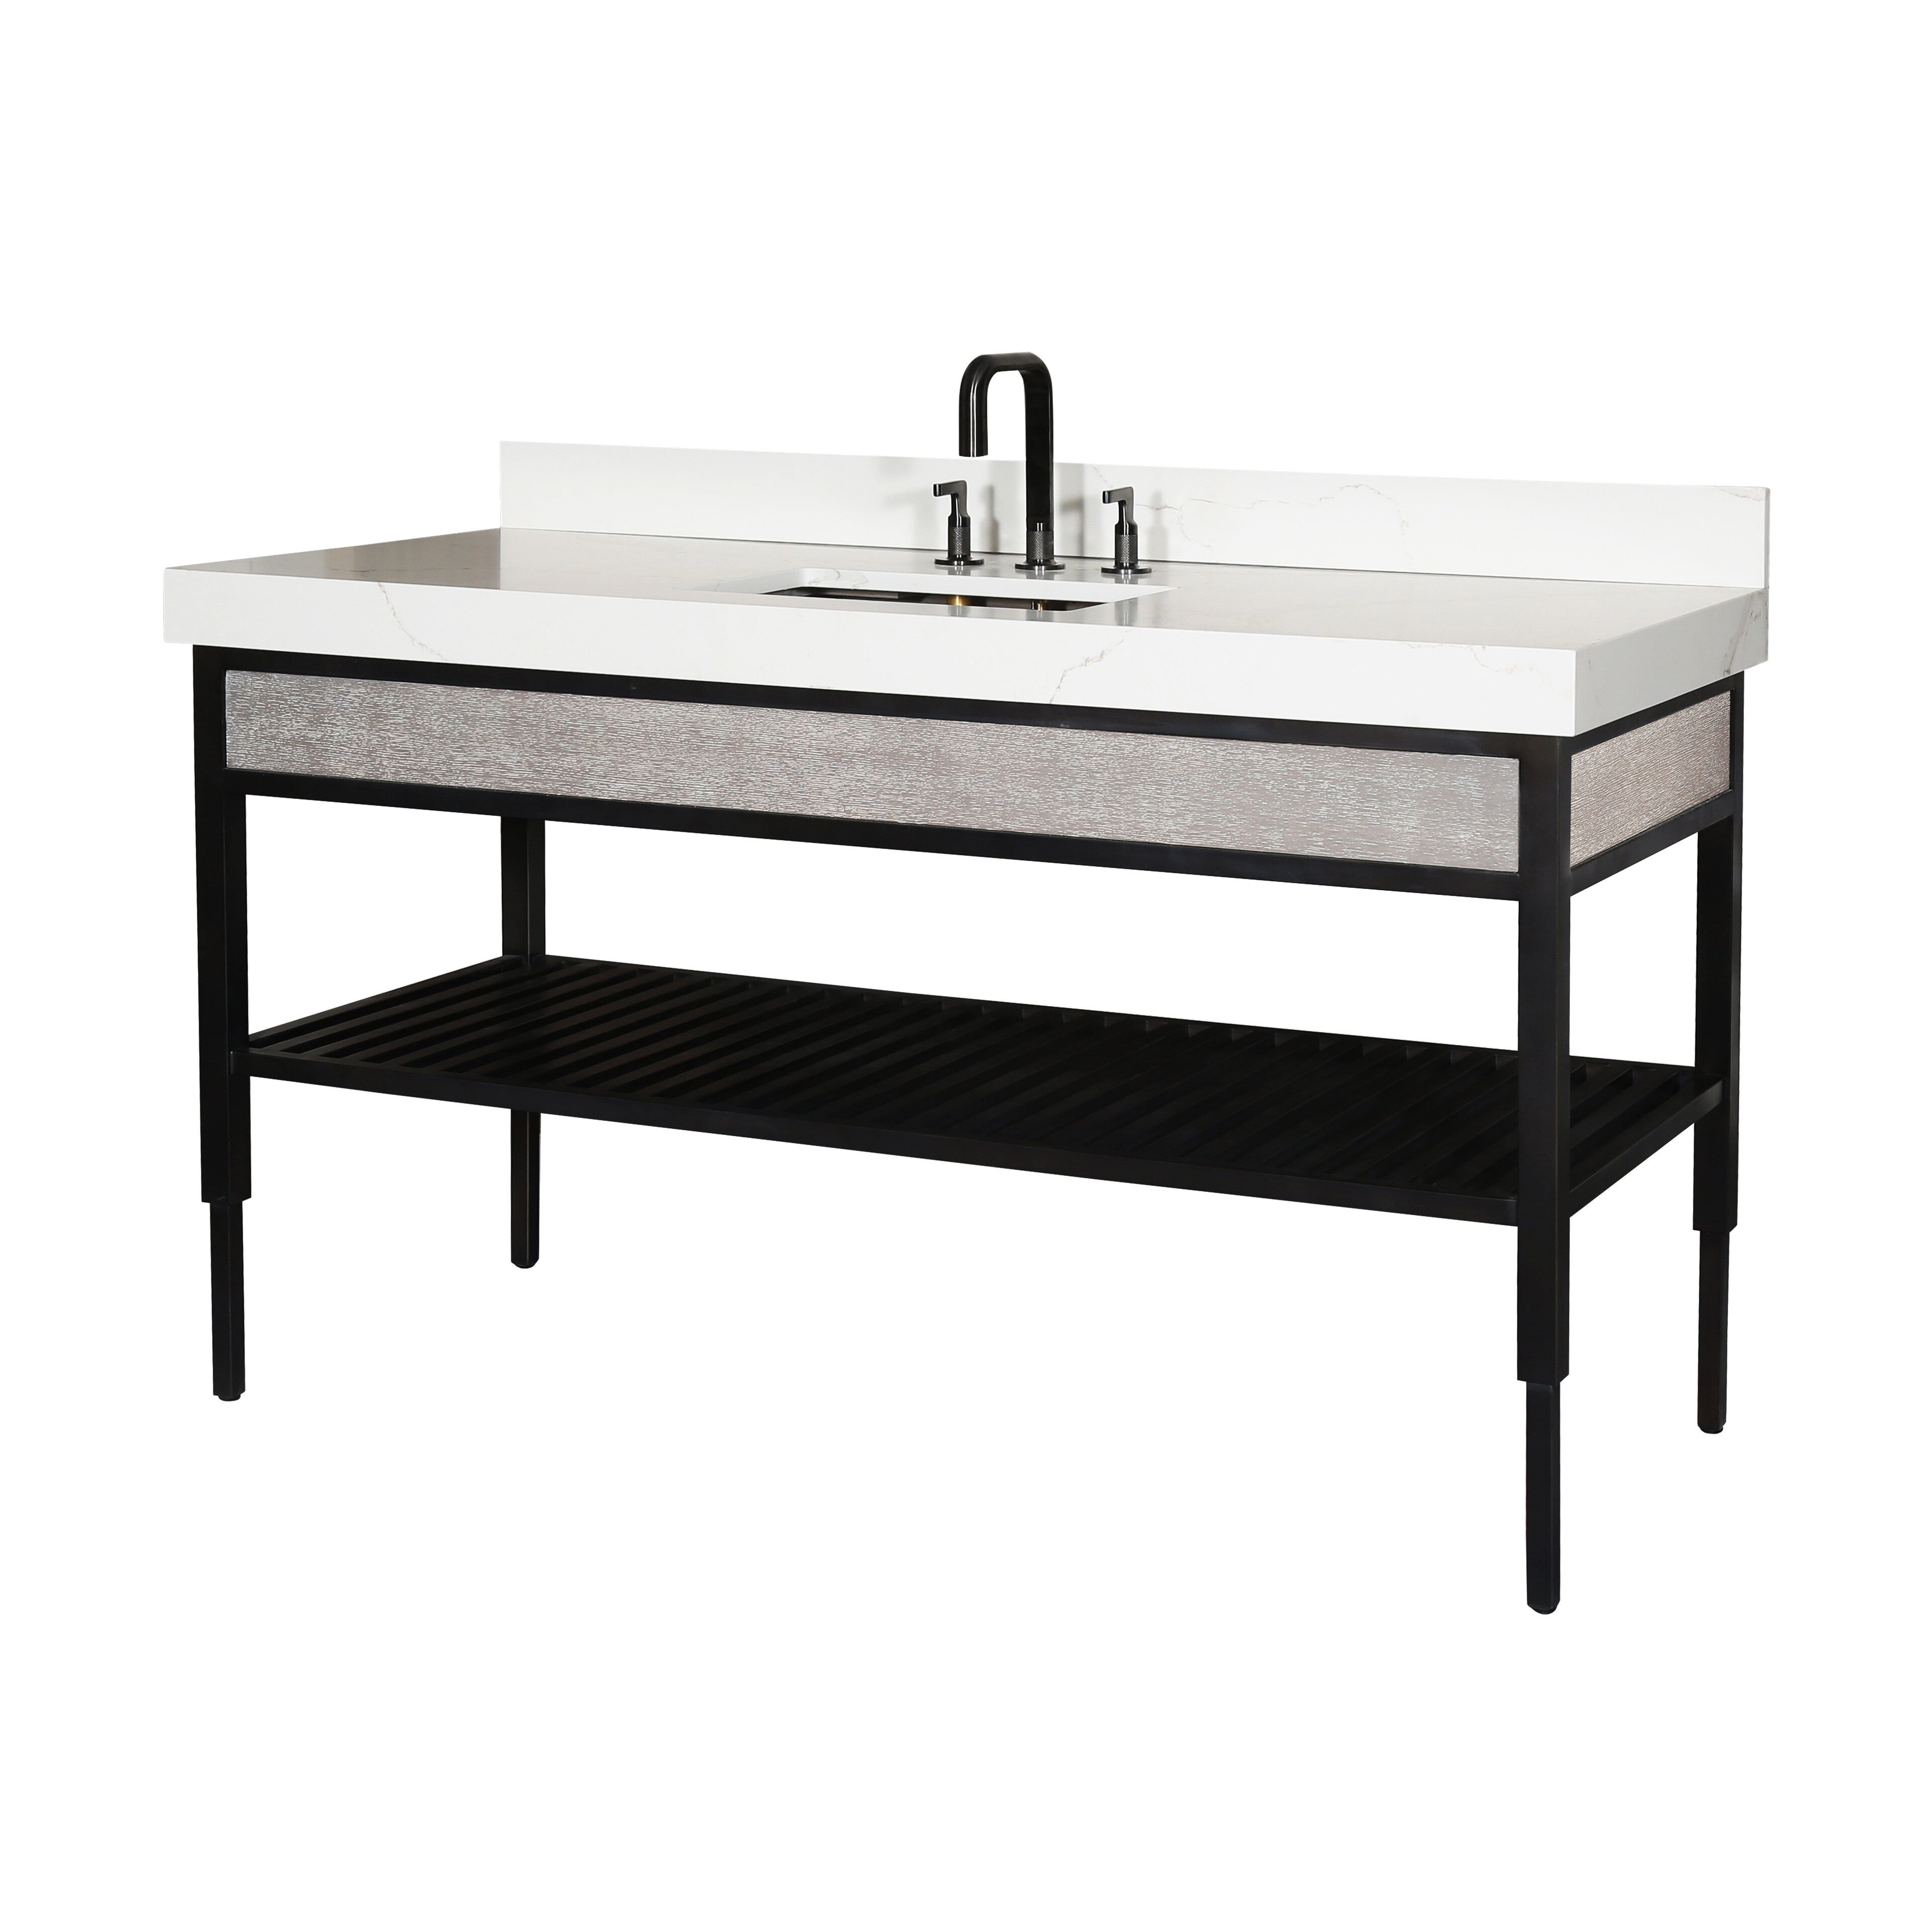 wall mounted vanity supplier, wall mounted vanity factory, modern wall mounted vanity supplier